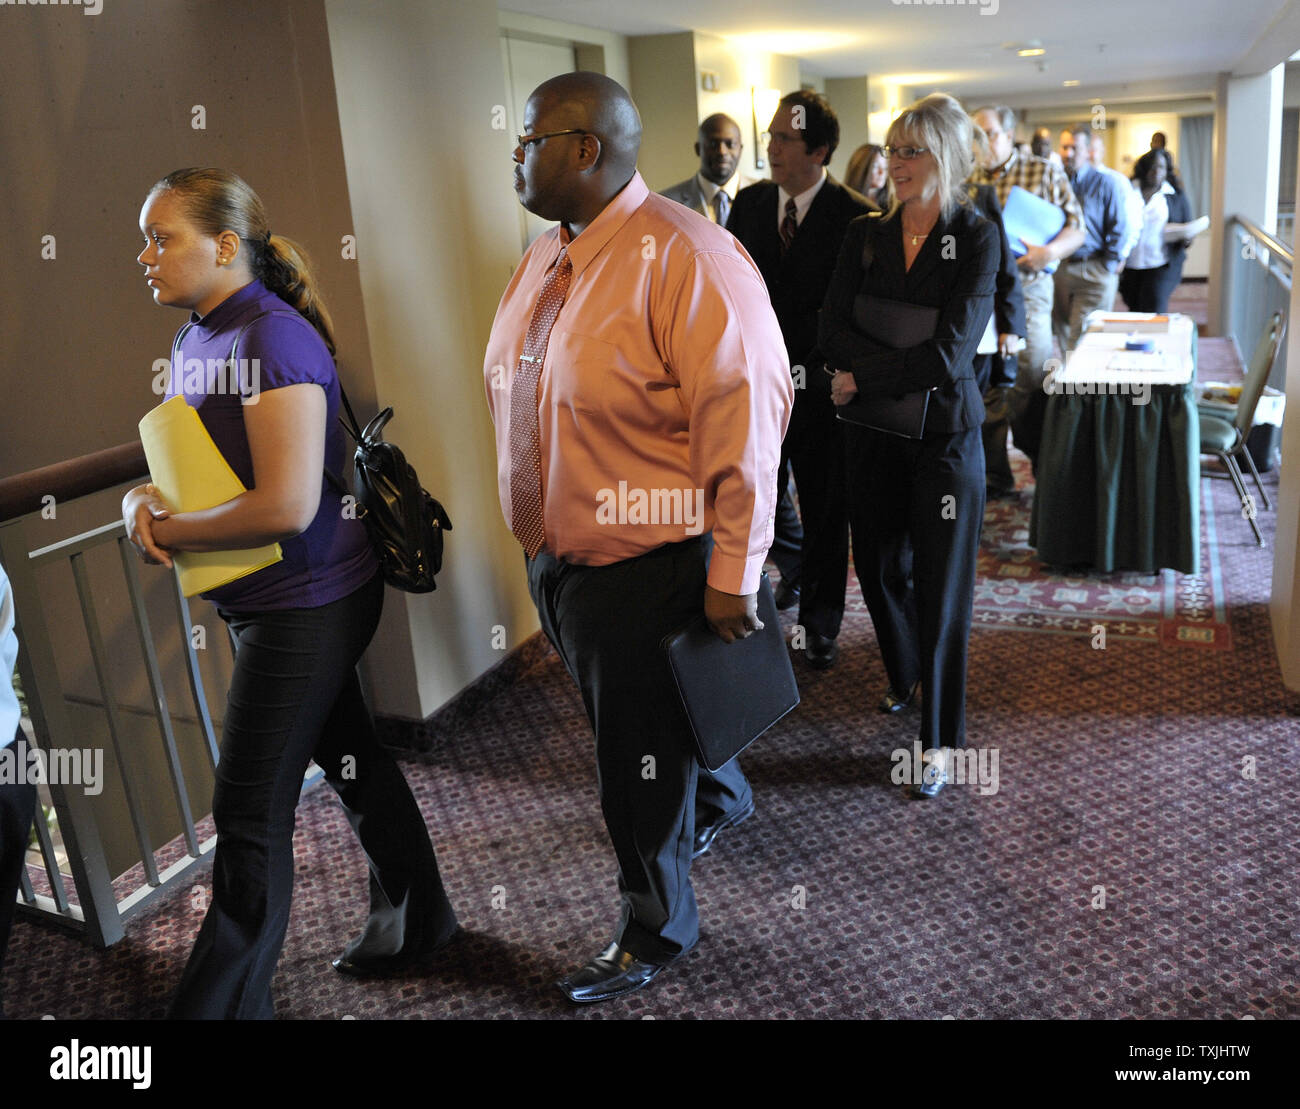 Employment seekers line up as a job fair  opens on August 24, 2011 in Lombard, Illinois. The seasonably adjusted unemployment rate for Illinois is at 9.5 percent as jobs and job creation continue to be a hot political issue.    UPI/Brian Kersey Stock Photo